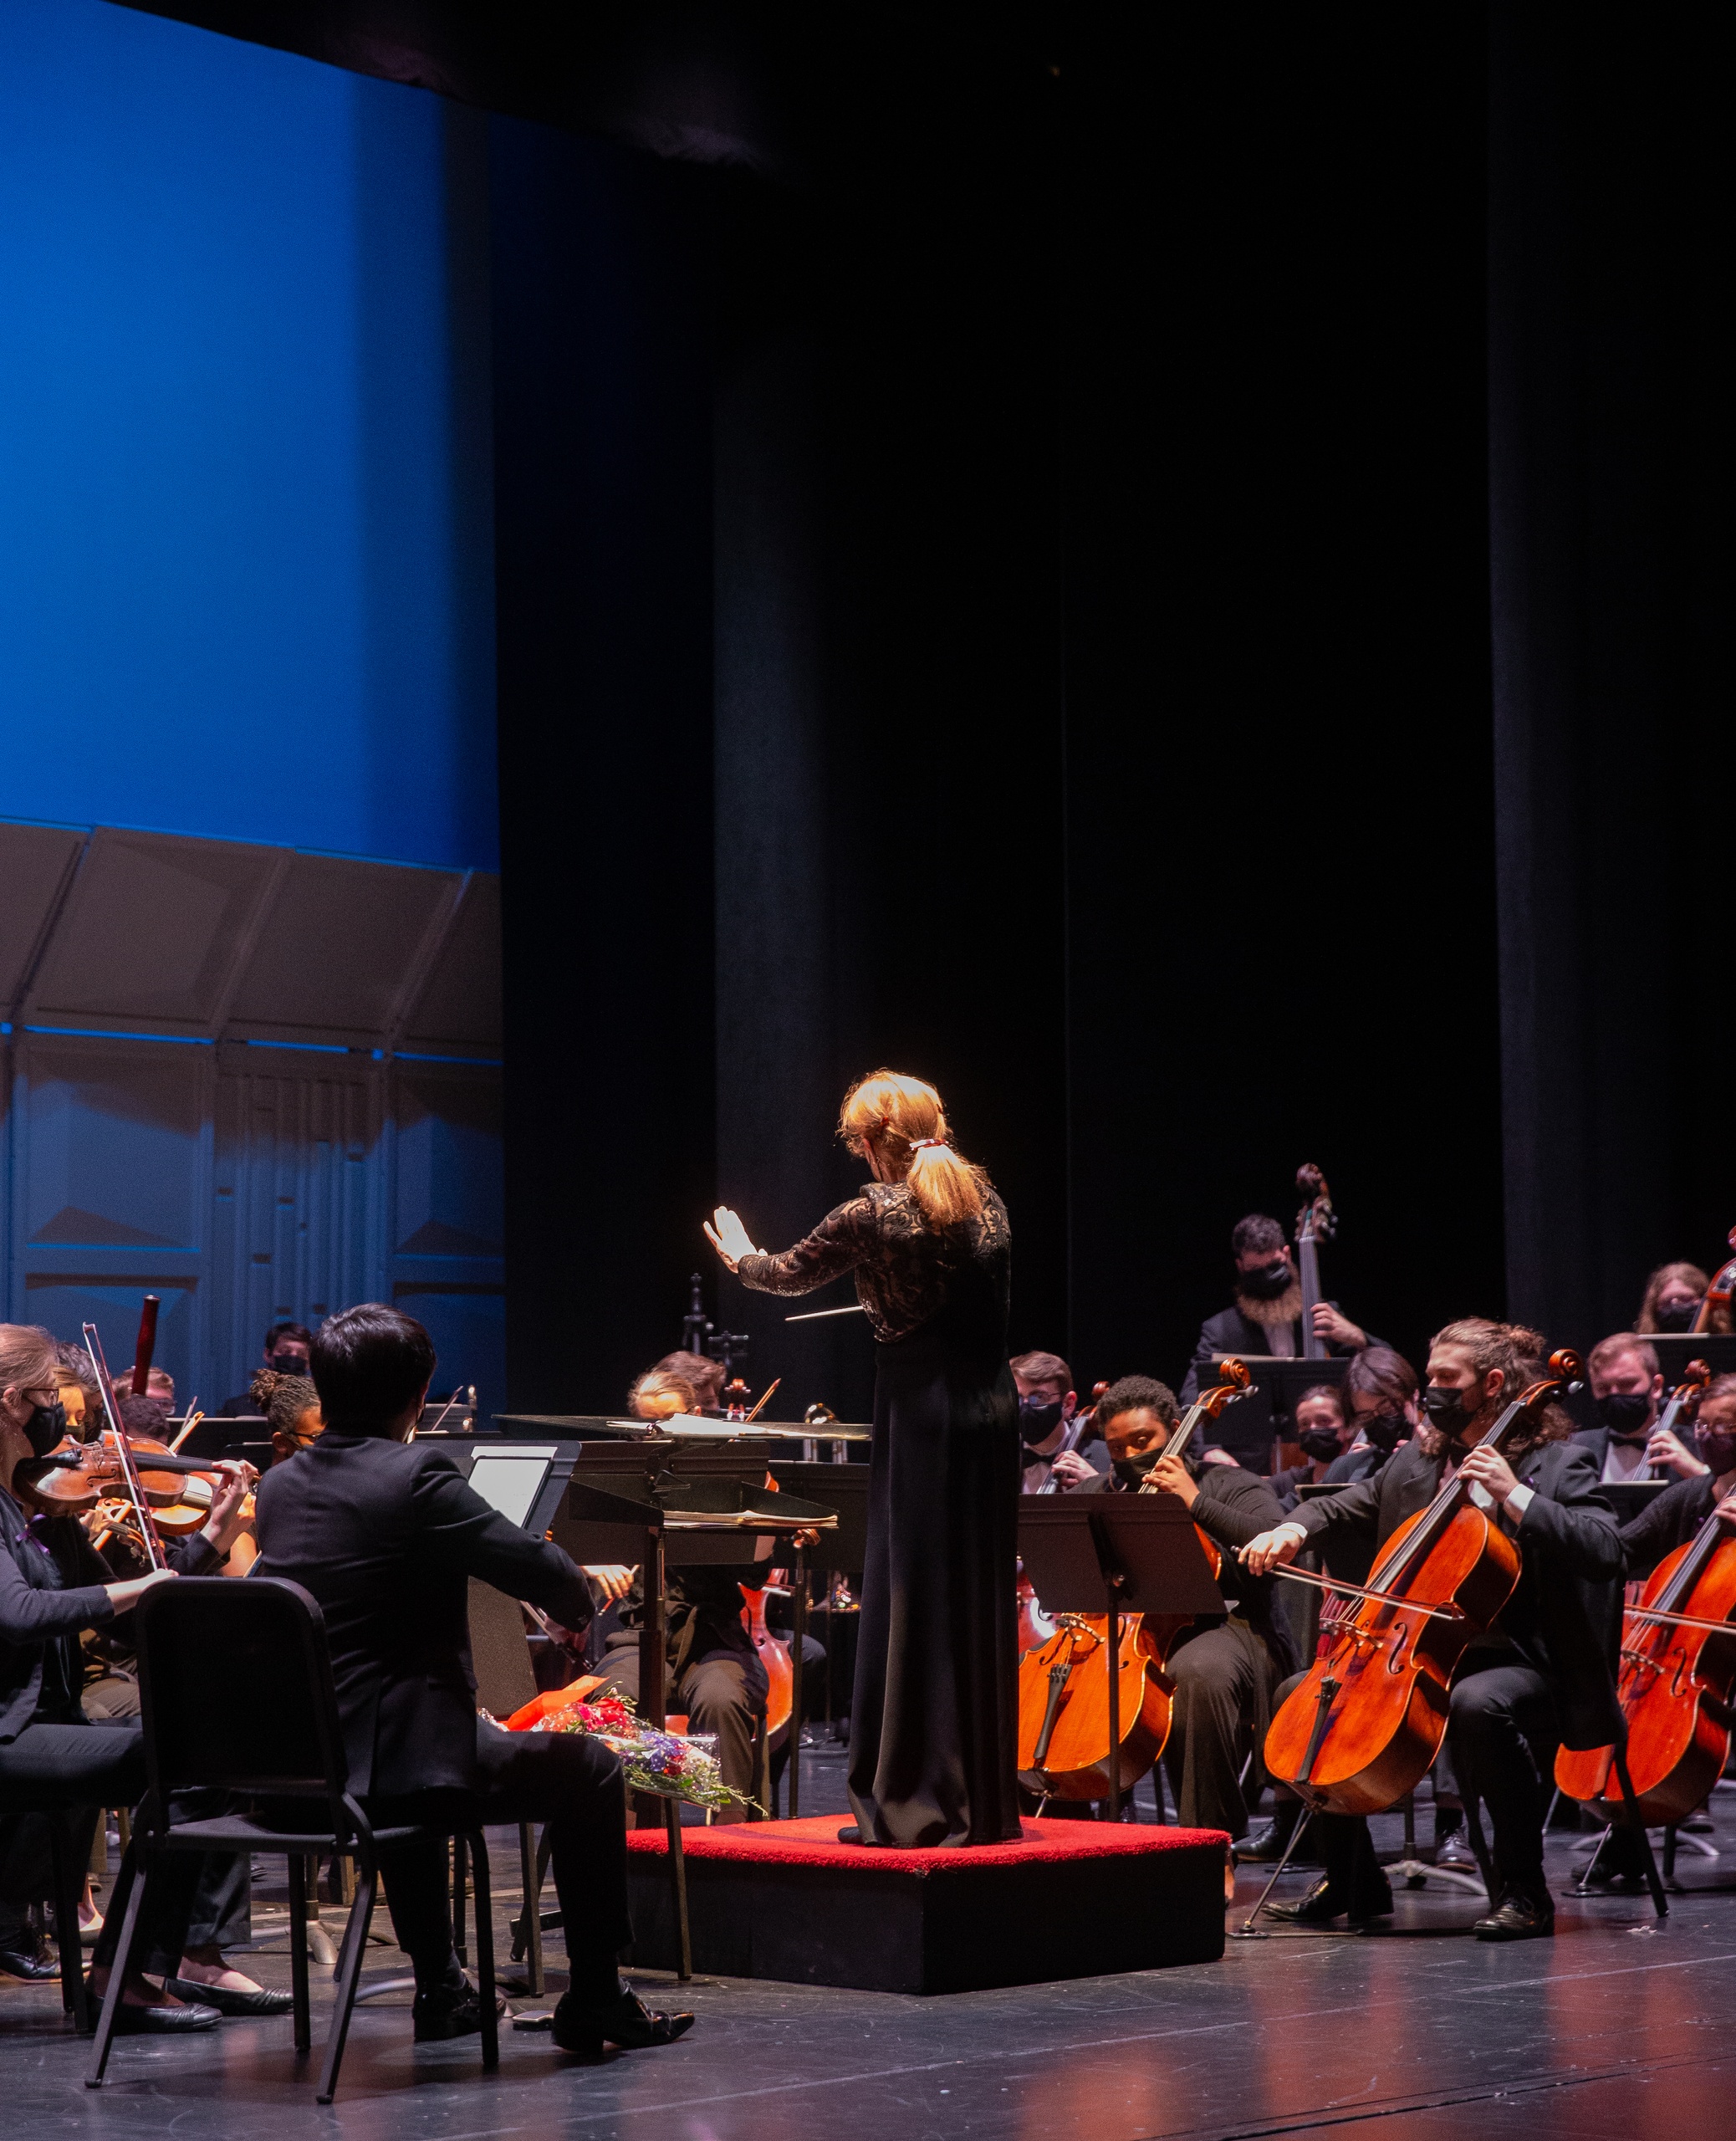 Conductor orchestrates an orchestra